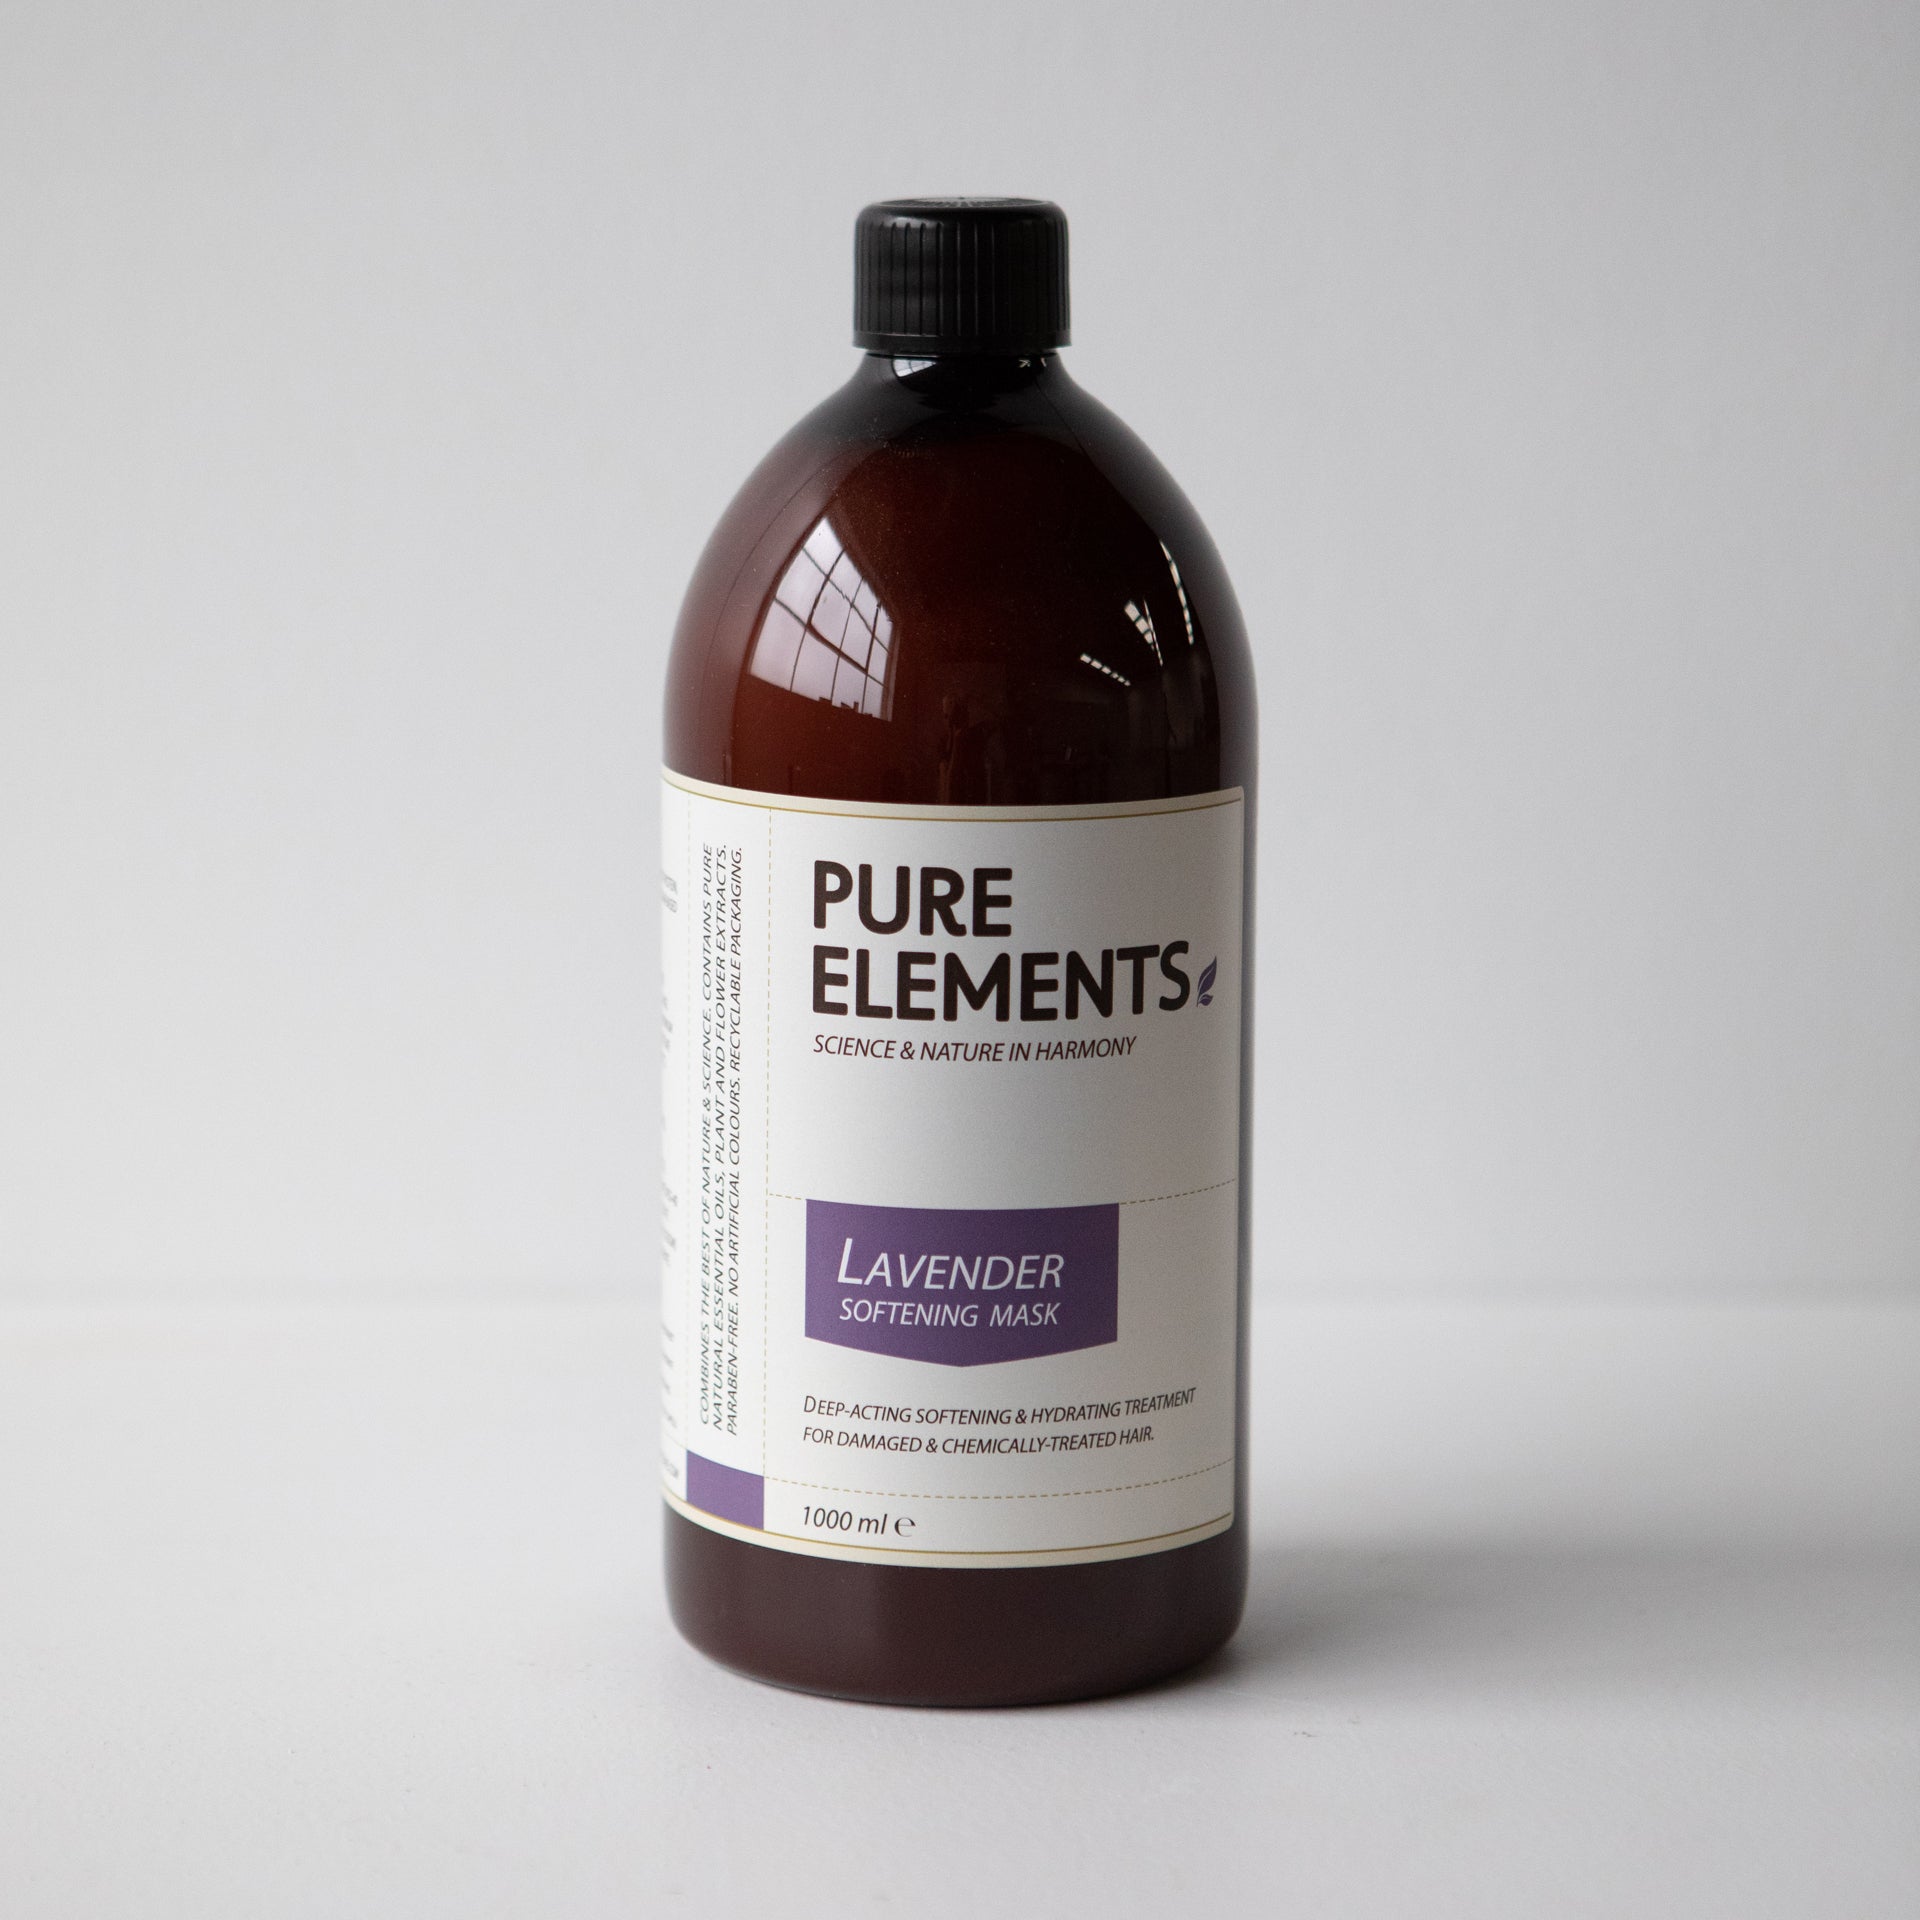 Deep-acting treatment for damaged, chemically treated hair. Softens, hydrates hair & scalp. Pure essential oils-Lavender & Patchouli. Natural extract-Lime Blossom. Hydrolysed Keratin & Wheat Protein, Lanolin & Panthenol. Balances dry-oily hair, smooths, soothes & refreshes hair, strengthens, increase shine, calms scalp1234